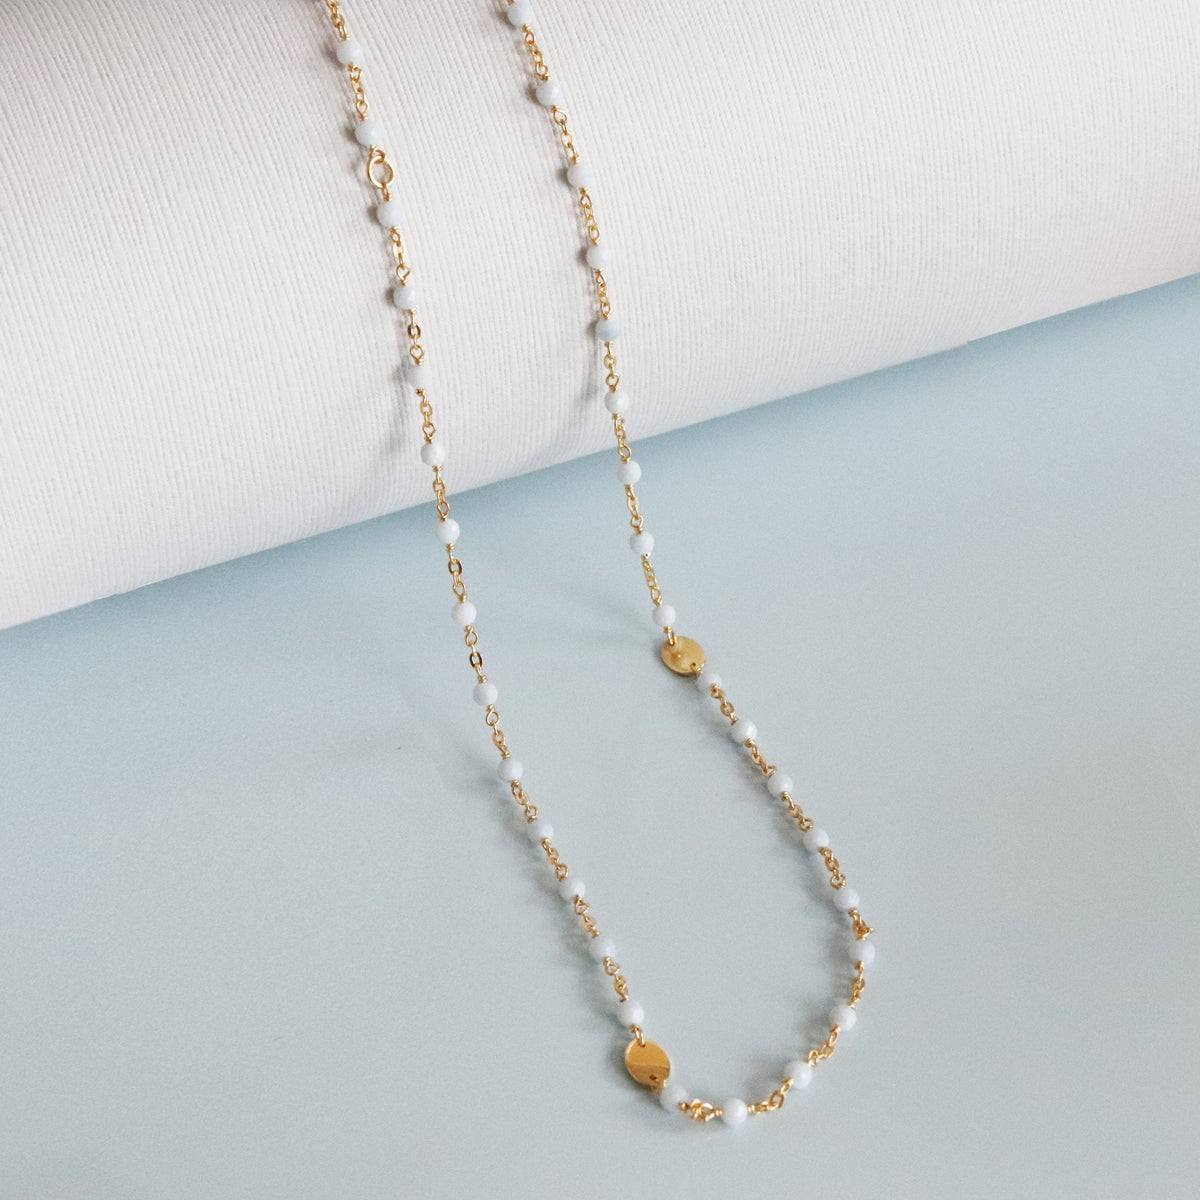 ICONIC SHORT BEADED NECKLACE - ARCTIC BLUE OPAL &amp; GOLD 16-20&quot; - SO PRETTY CARA COTTER